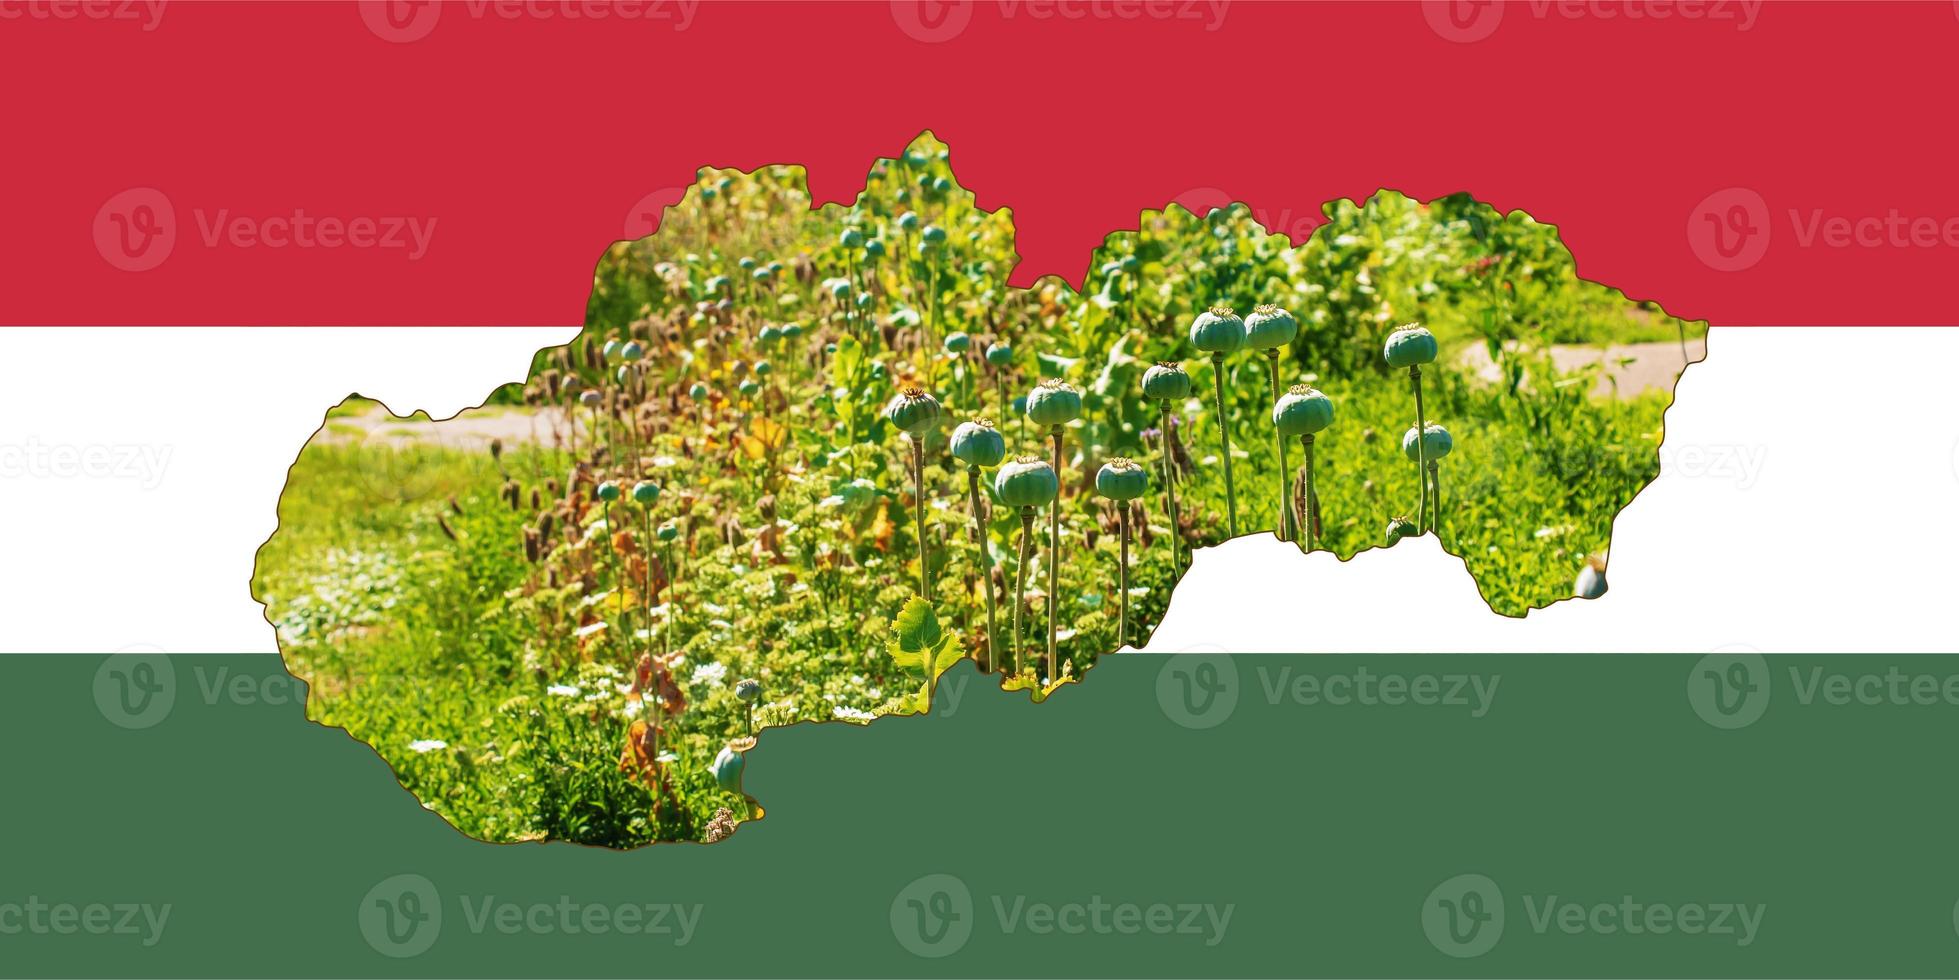 Outline map of Hungary with the image of the national flag. Image of a poppy cob inside the card. Collage. Hungary is a major poppy producer. photo